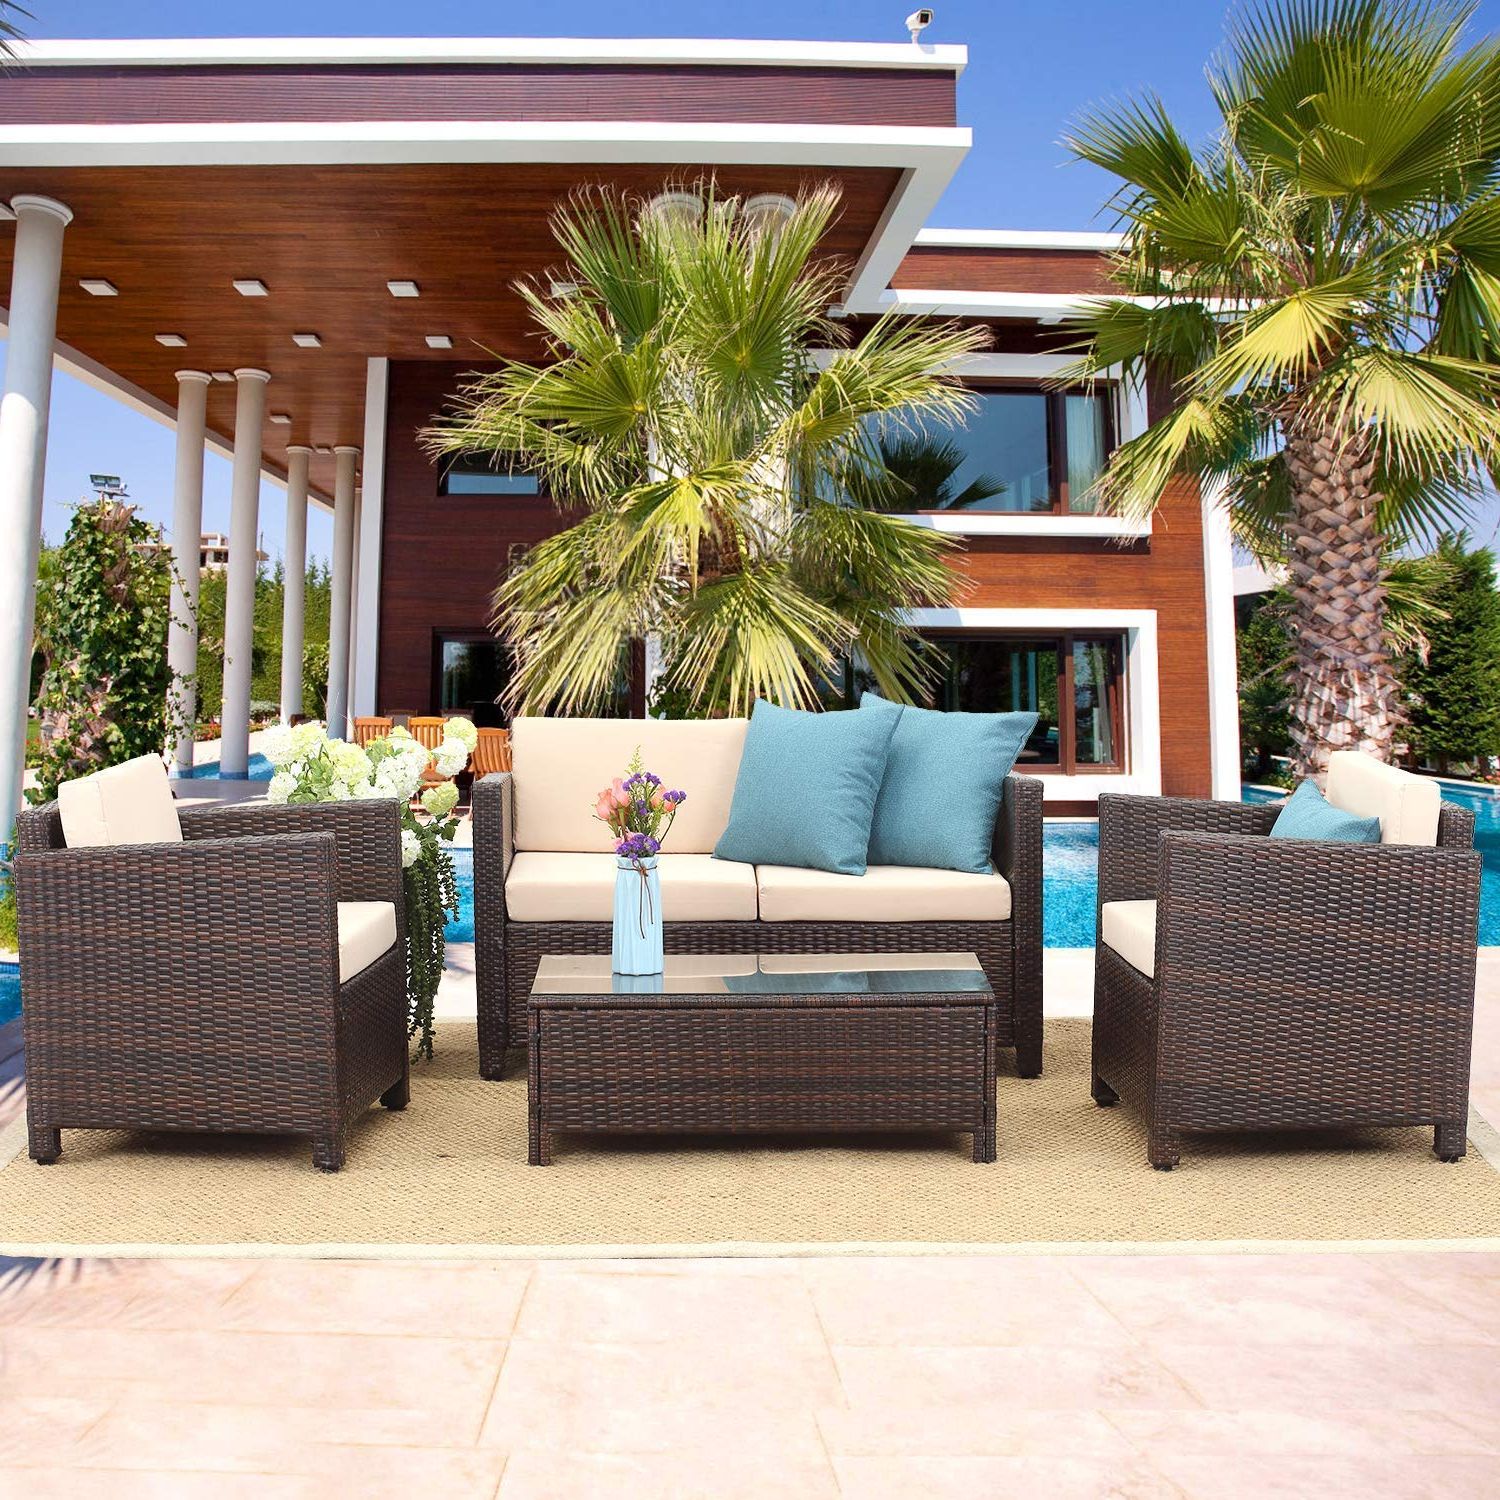 Famous Wicker Beige Cushion Outdoor Patio Sets Intended For Outdoor Patio Furniture Set, 5 Piece Conversation Set Wicker Sectional (View 12 of 15)